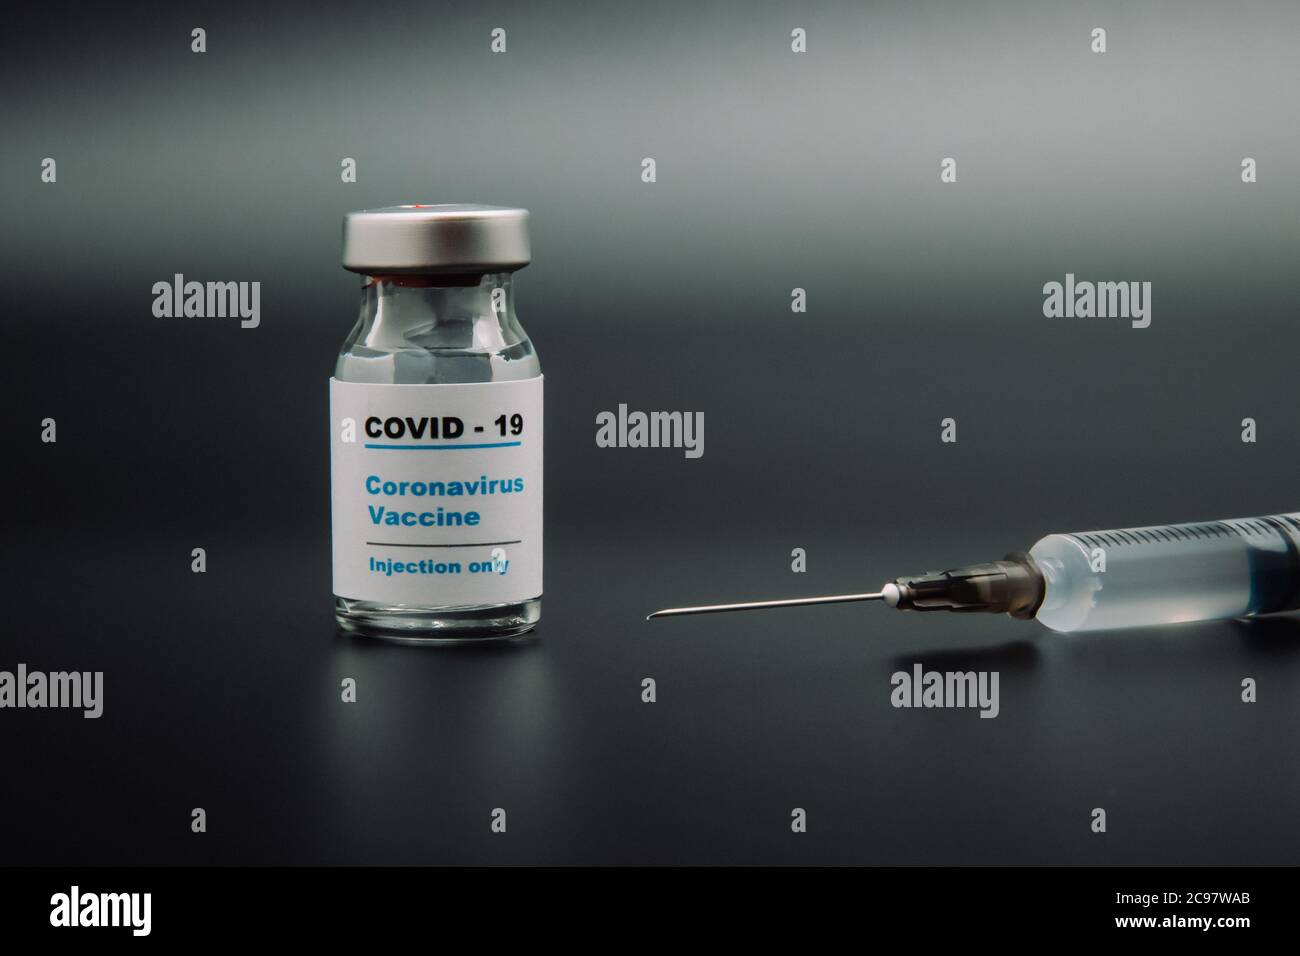 Small vaccine bottle (phial) with a label that read 'Covid - 19 Corona virus Vaccine injection only' & a medical syringe isolated on blue Vaccination Stock Photo